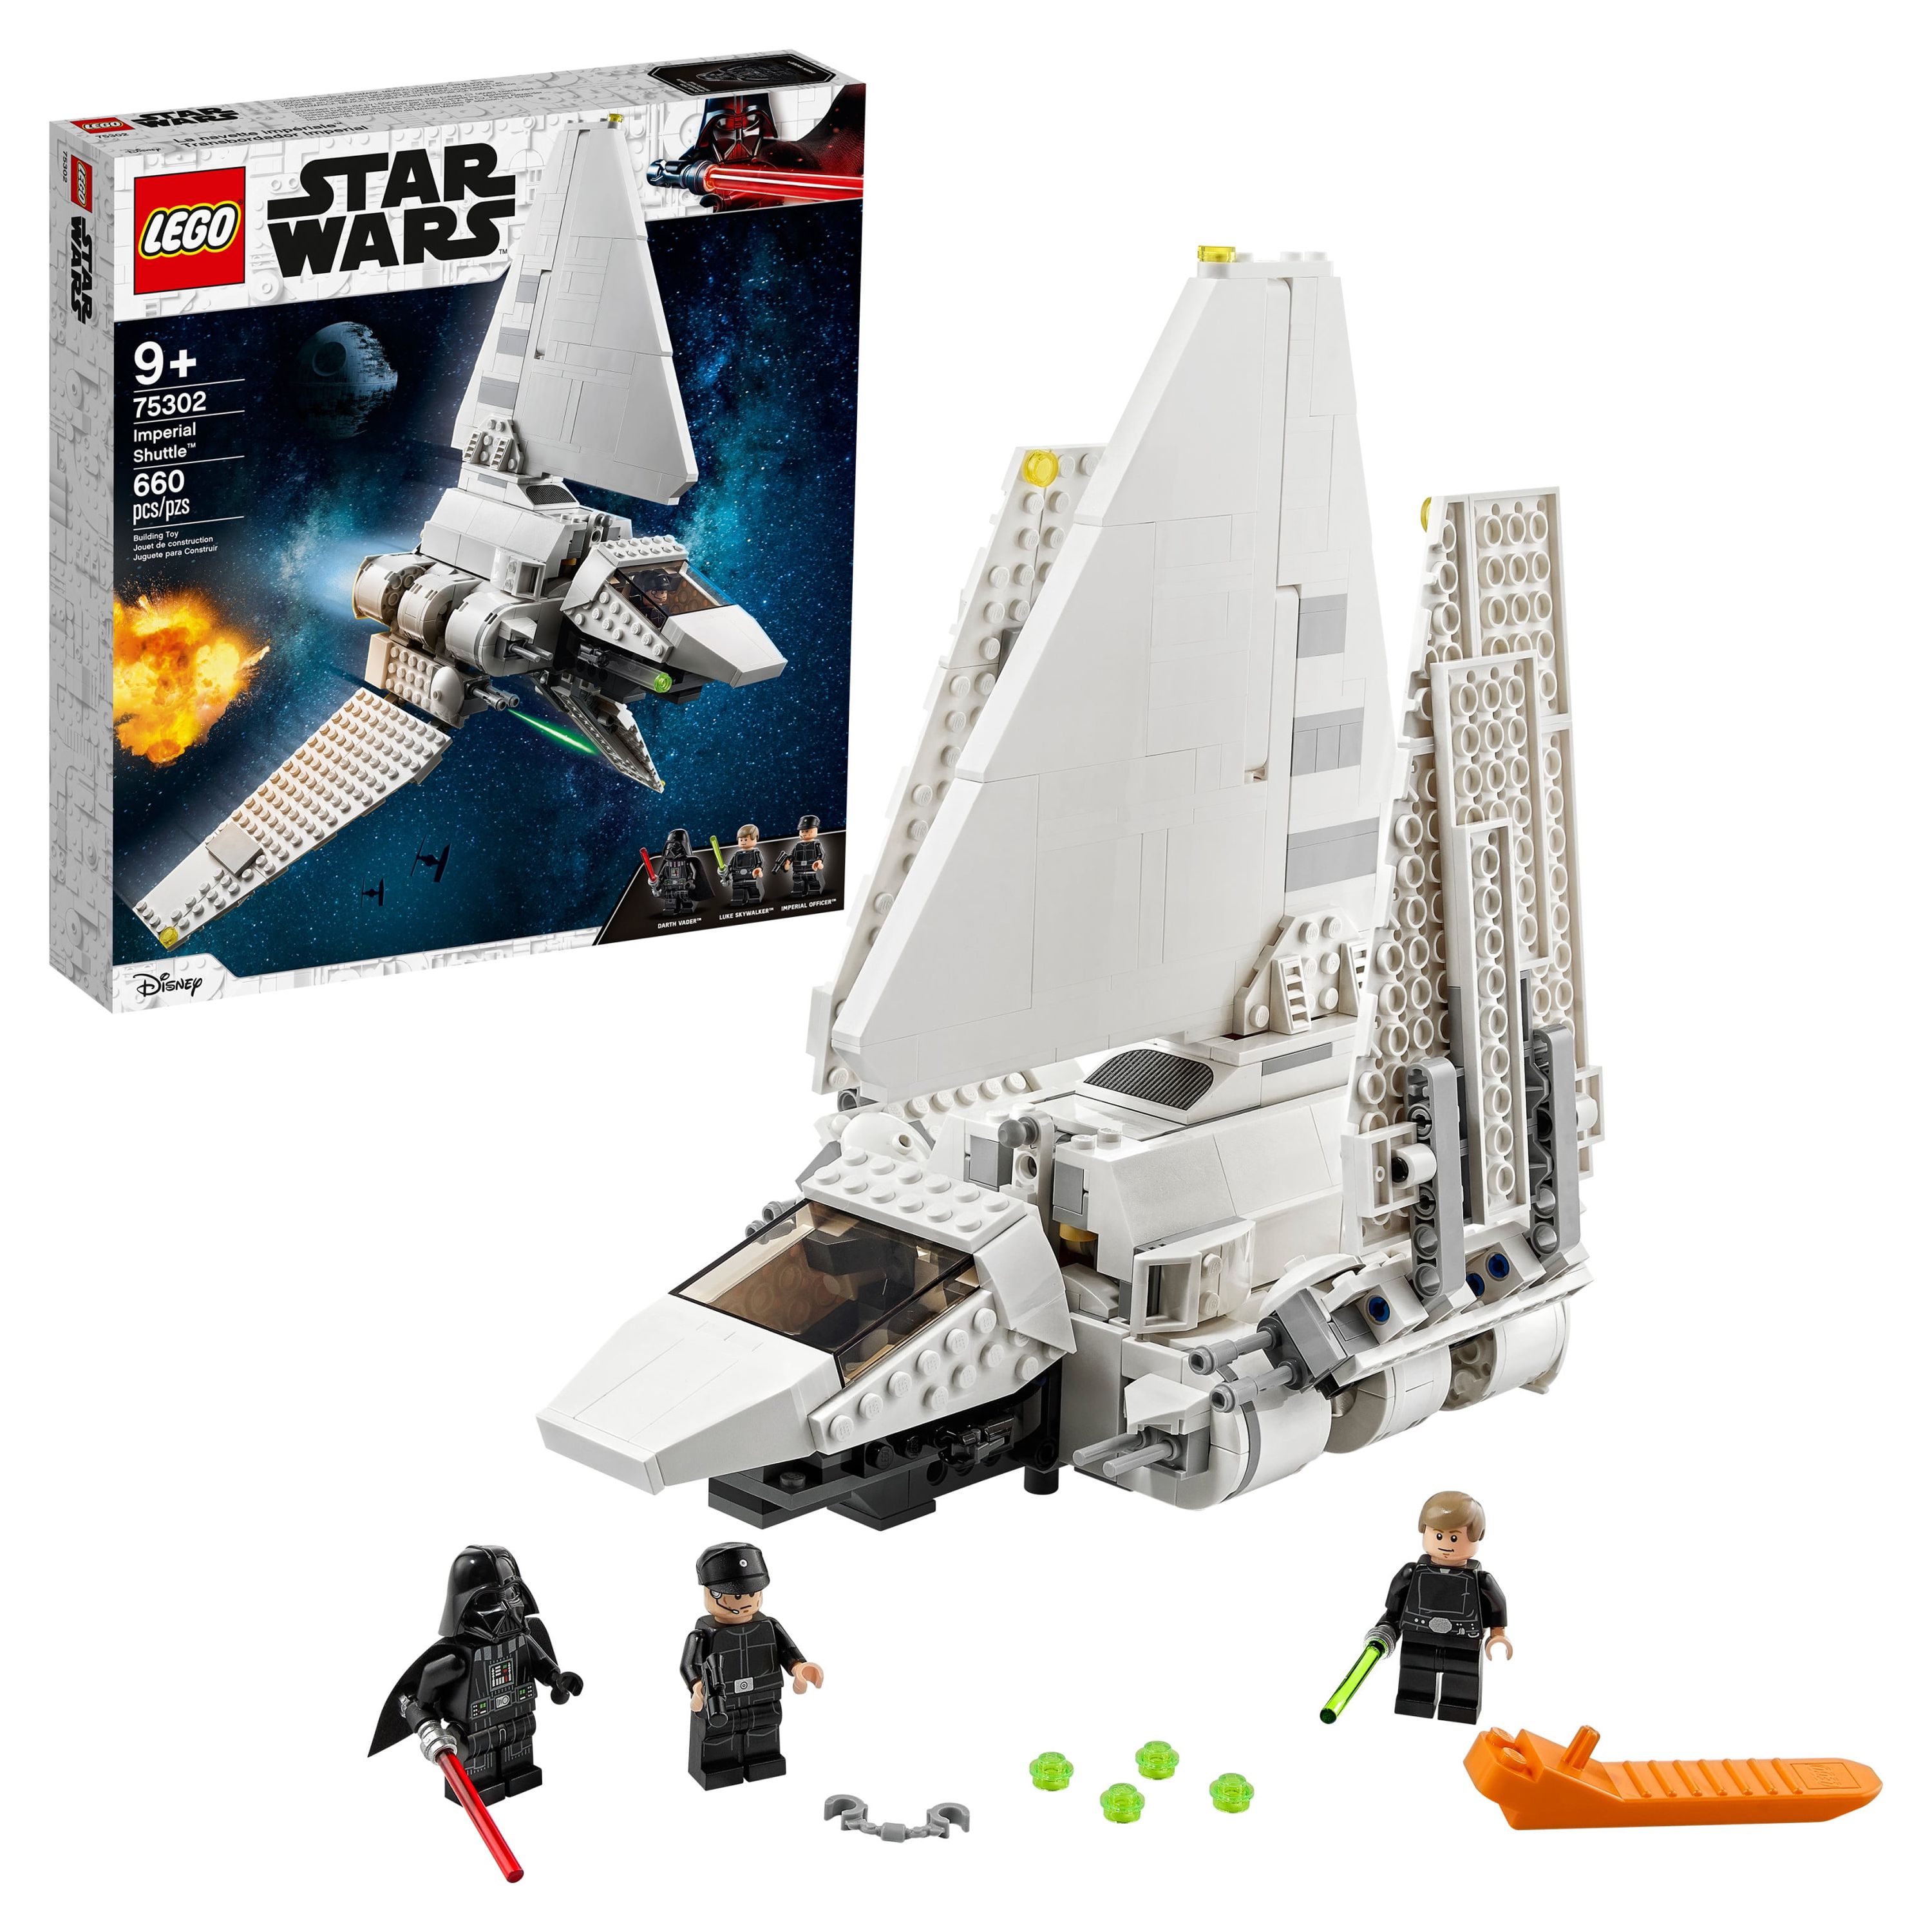 LEGO Star Wars Imperial Shuttle 75302 Building Toy (660 Pieces) - image 1 of 6